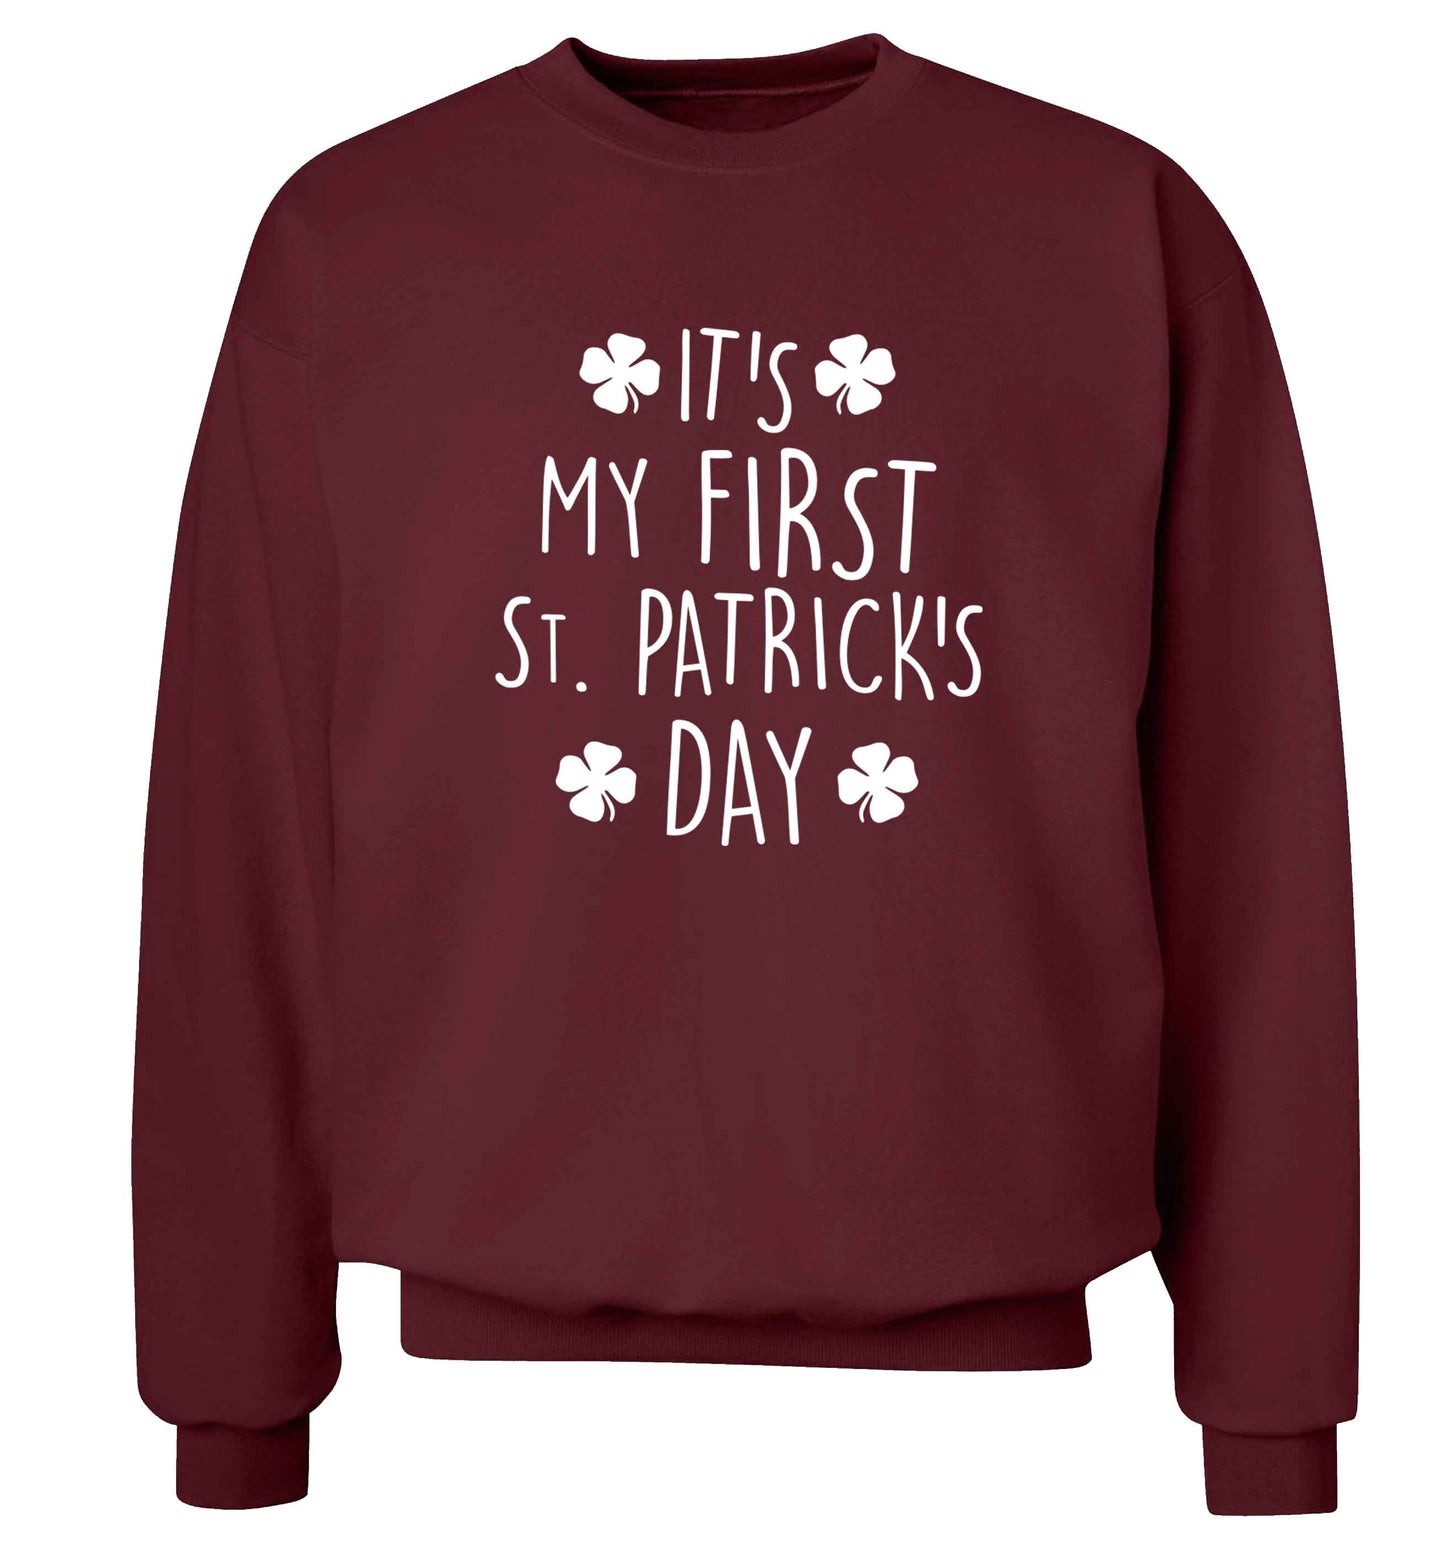 It's my first St.Patrick's day adult's unisex maroon sweater 2XL